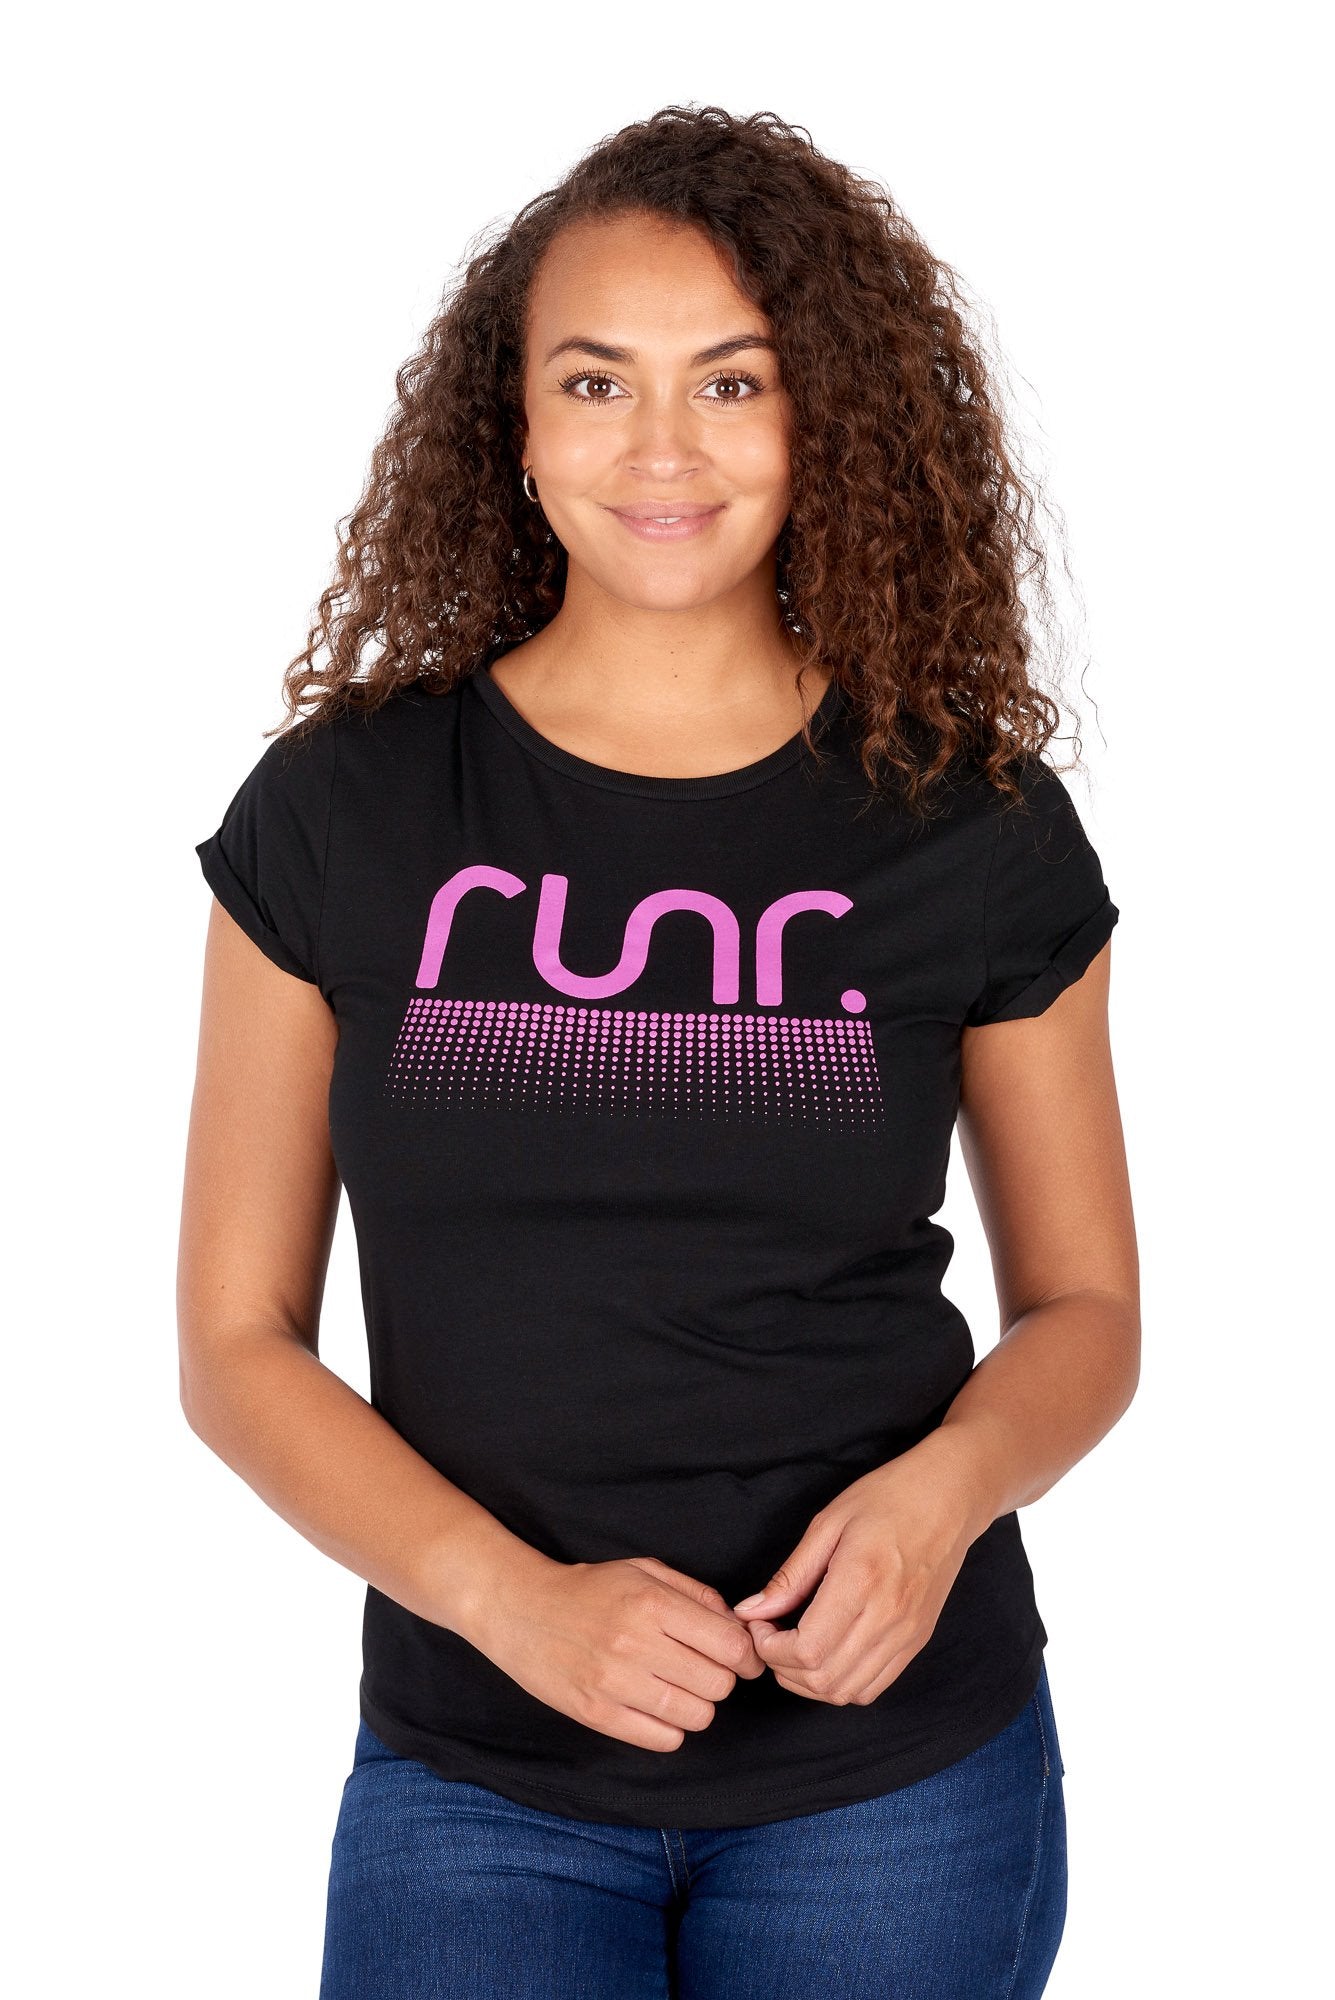 Women's Runr Energised T-Shirts black with magenta